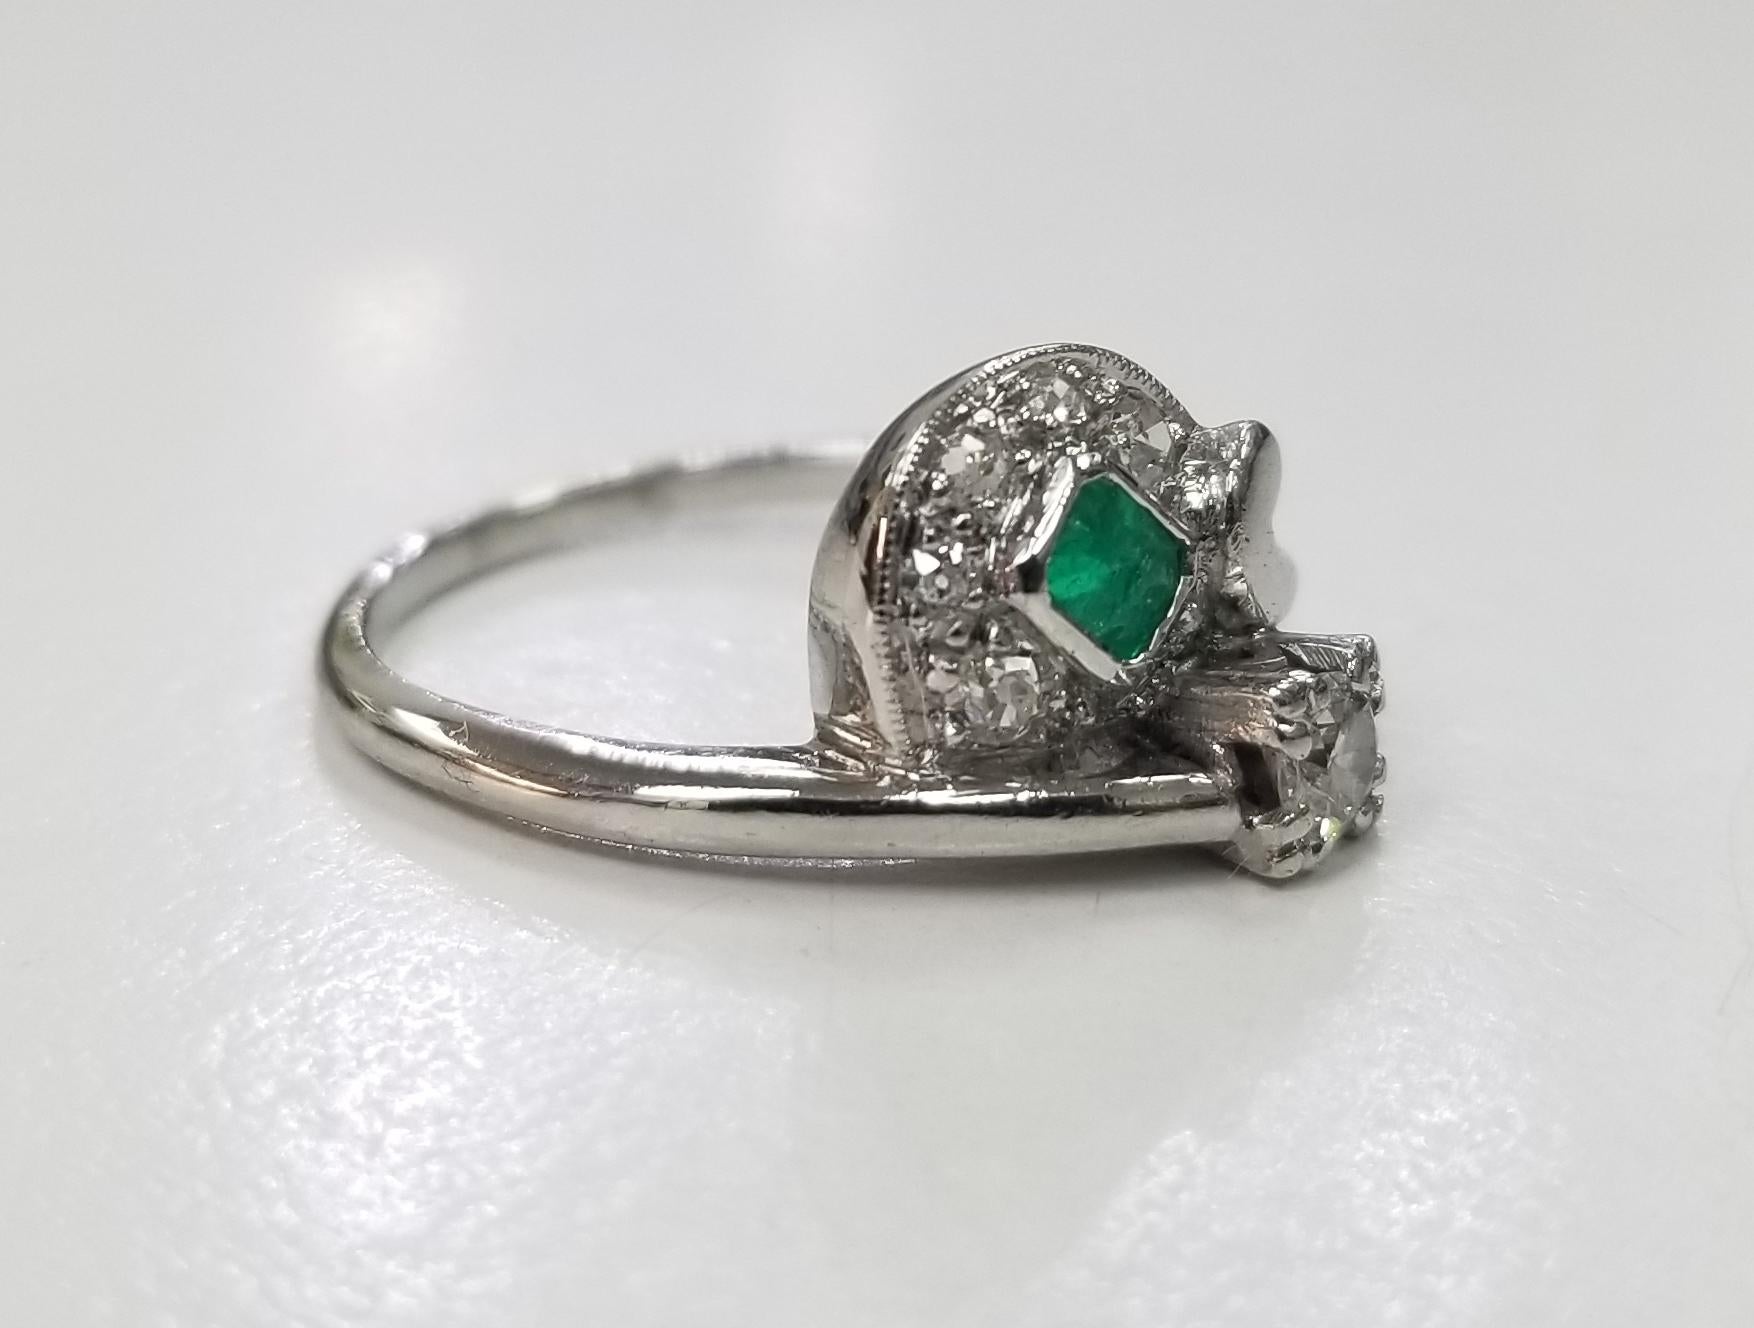 Platinum  emerald and diamond ring, containing 1 emerald weighing .25pts. and 6 round diamonds of very fine quality weighing .32pts. ring size is 6 and can be sized to fit for free.